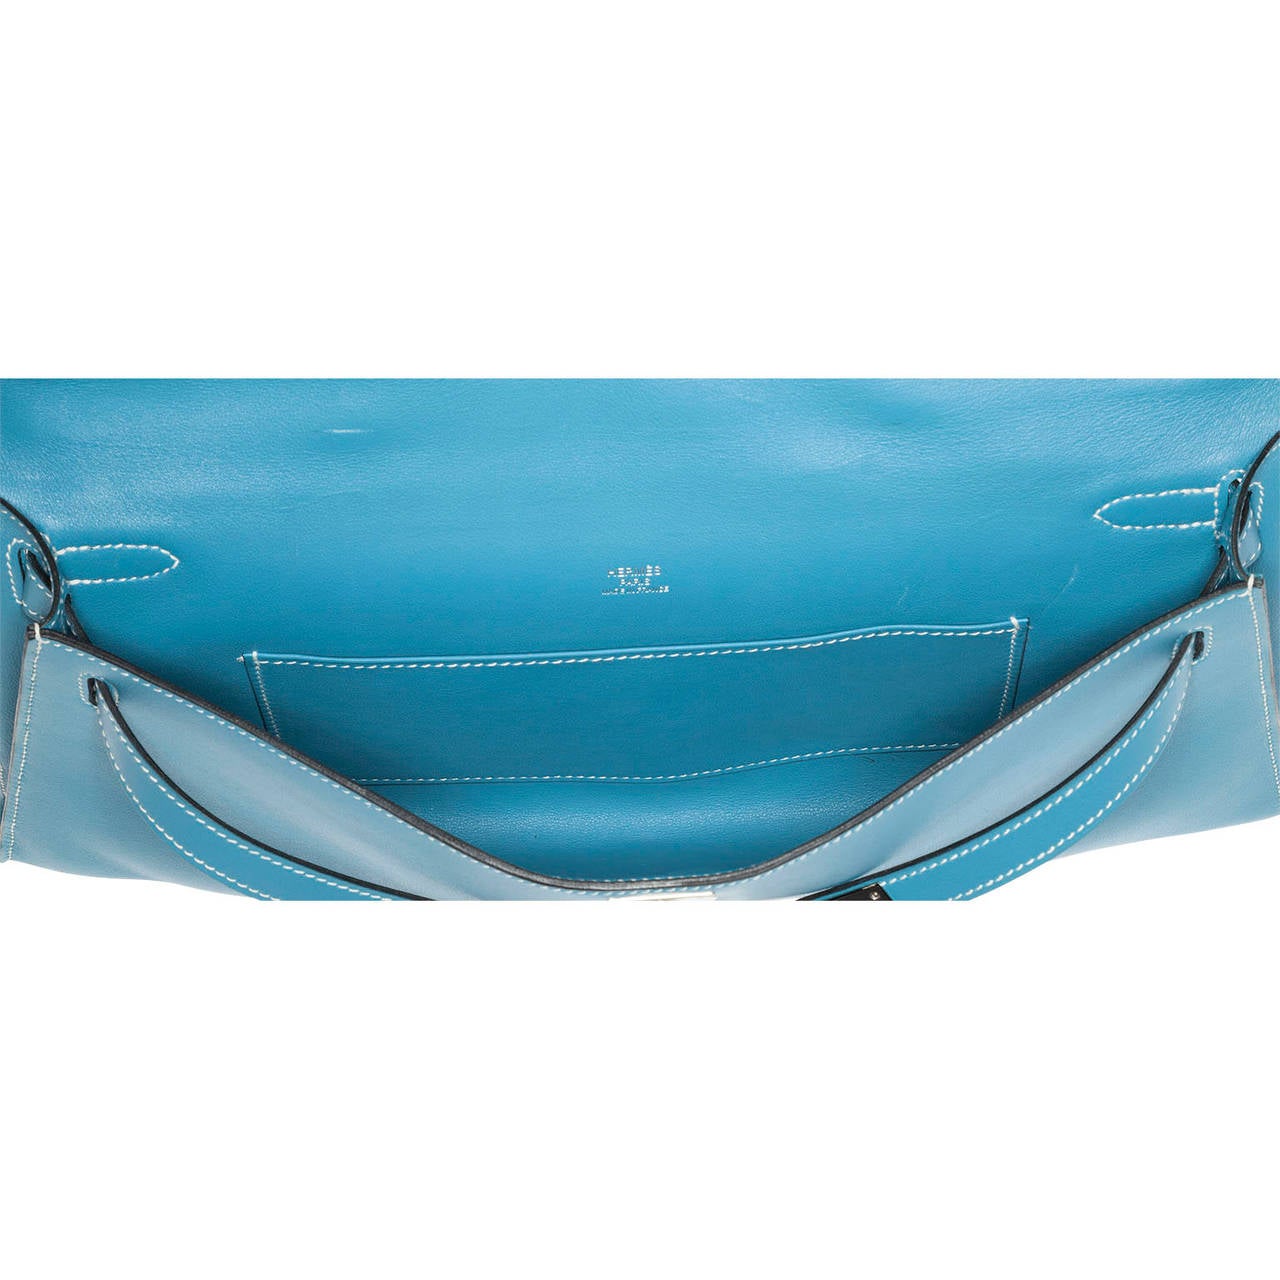 Hermes Blue Jean Swift Leather Kelly Longue Clutch Bag with Palladium Hardware In Excellent Condition For Sale In New York, NY